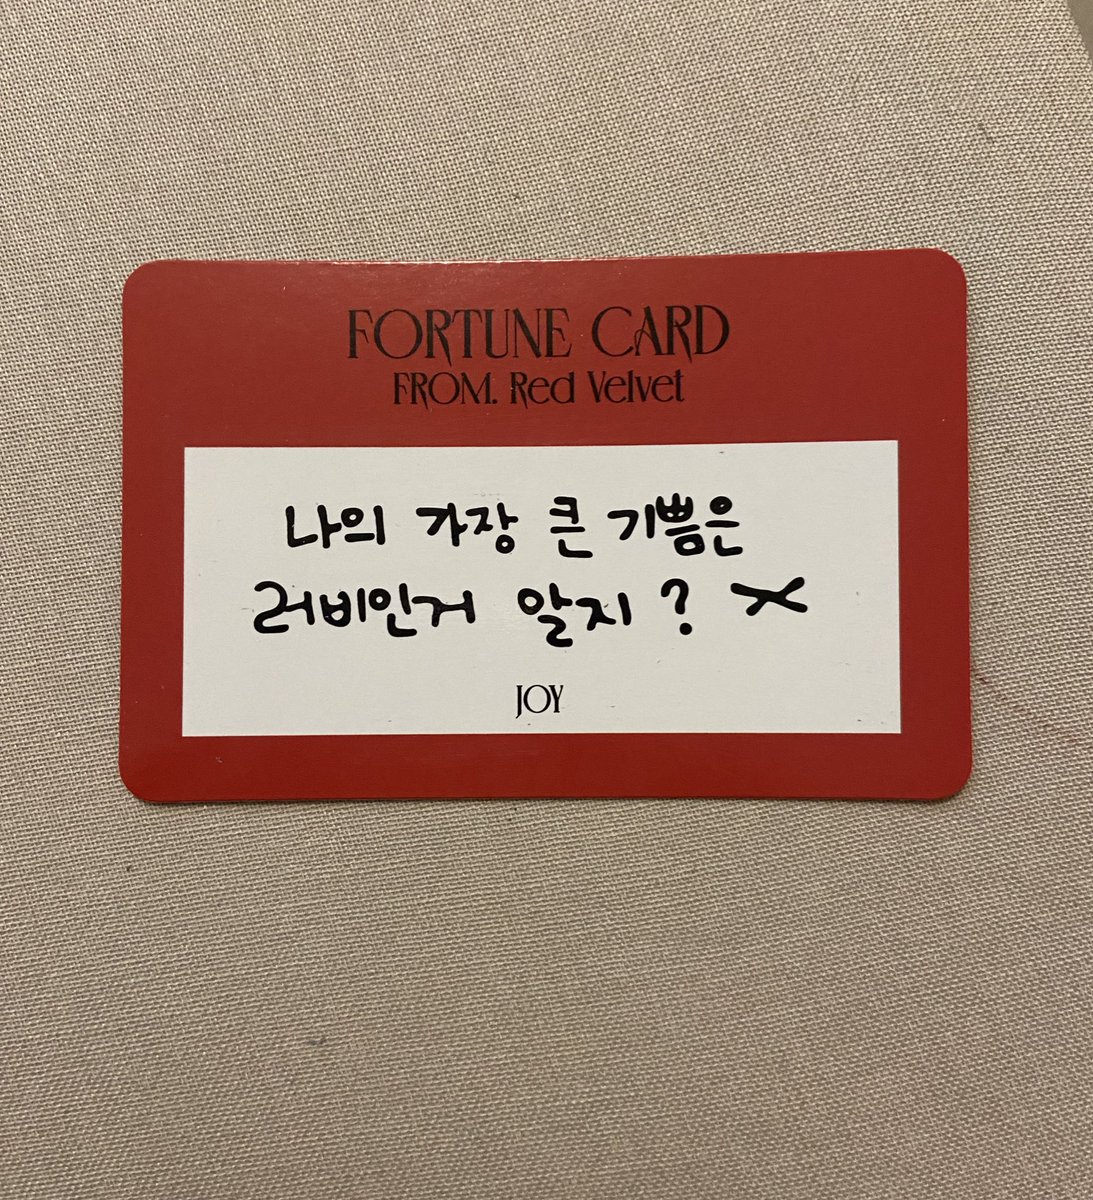 R To V fortune card JOY

'You know my biggest joy is ReVeluvs right? ><' 

#RtoV #PARKSOOYOUNG